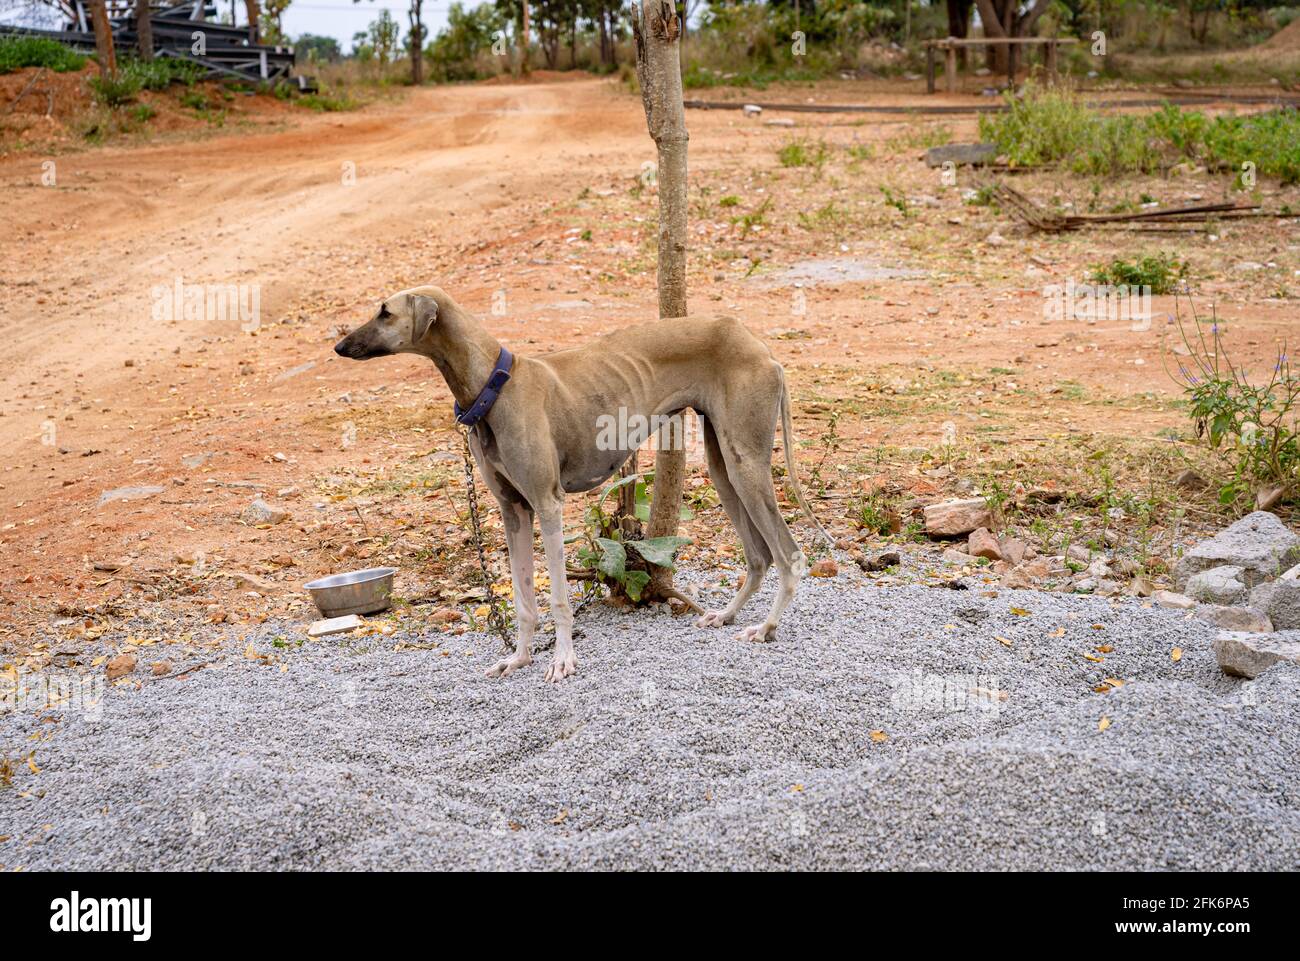 The Indian Ghost Hound or Rajapalayam is a famous dog breed in Tamil Nadu, India. Stock Photo